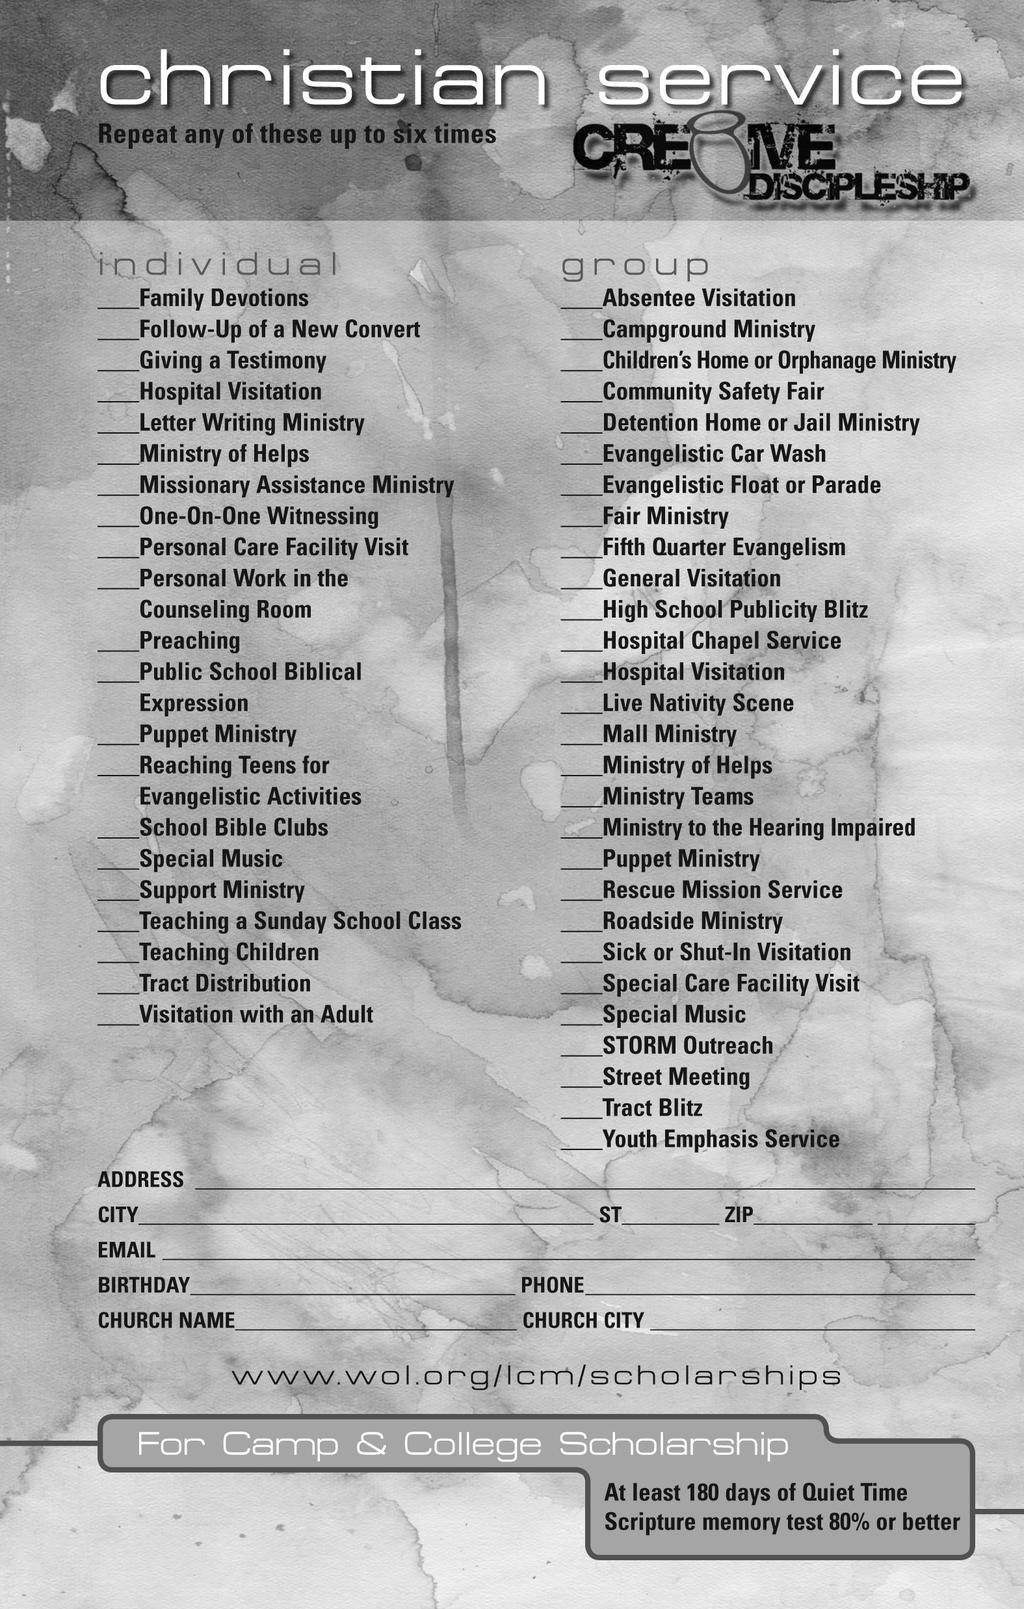 student ministries resource manual Requirements to earn Creative Discipleship scholarships Take another look at the back of the Creative Disciple Reward Sheet.